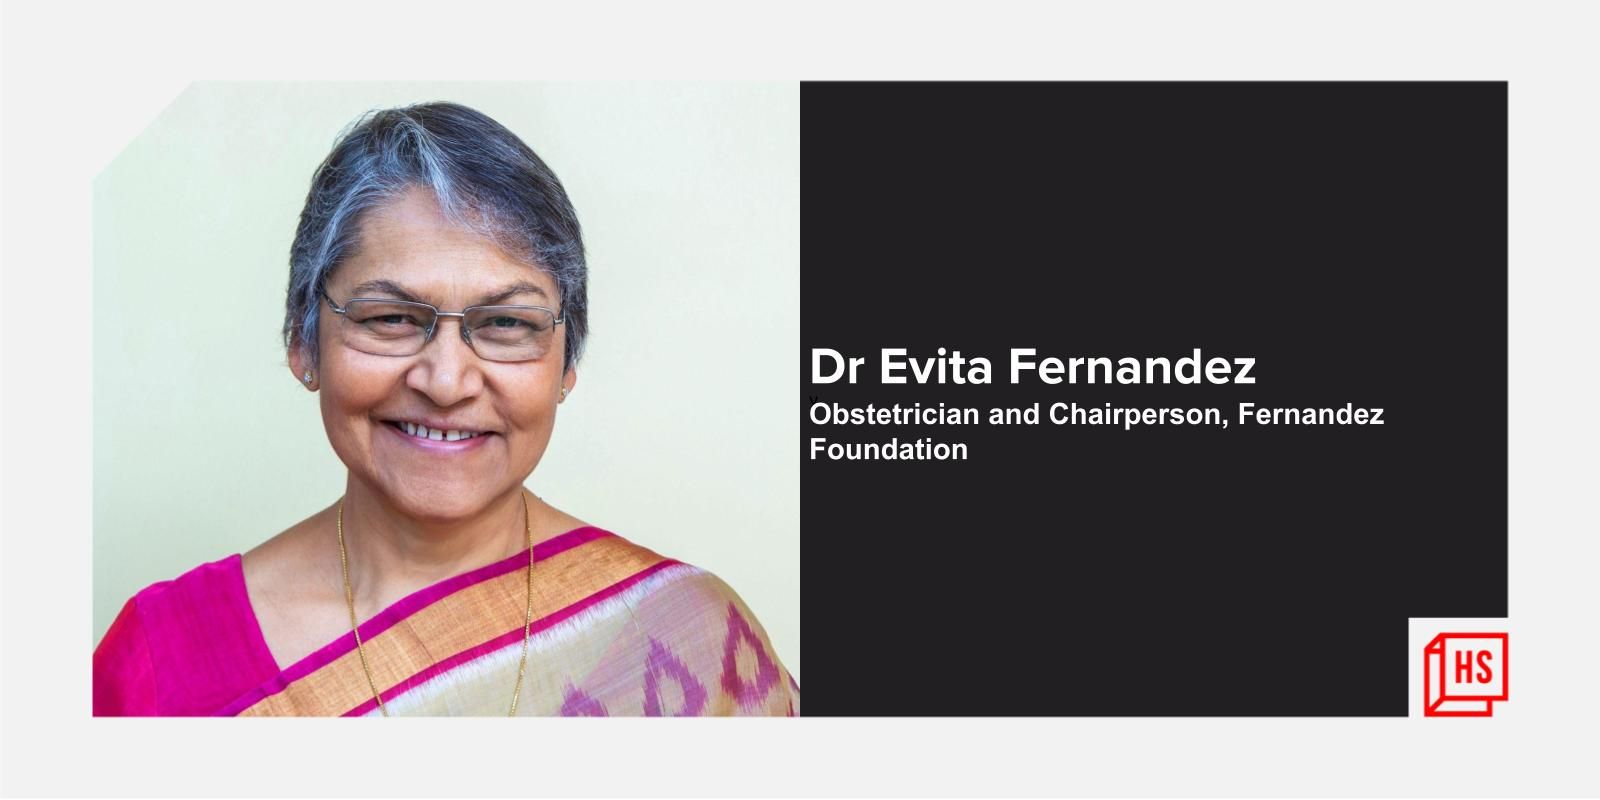 Meet Dr Evita Fernandez who is spearheading the midwifery initiative in India
